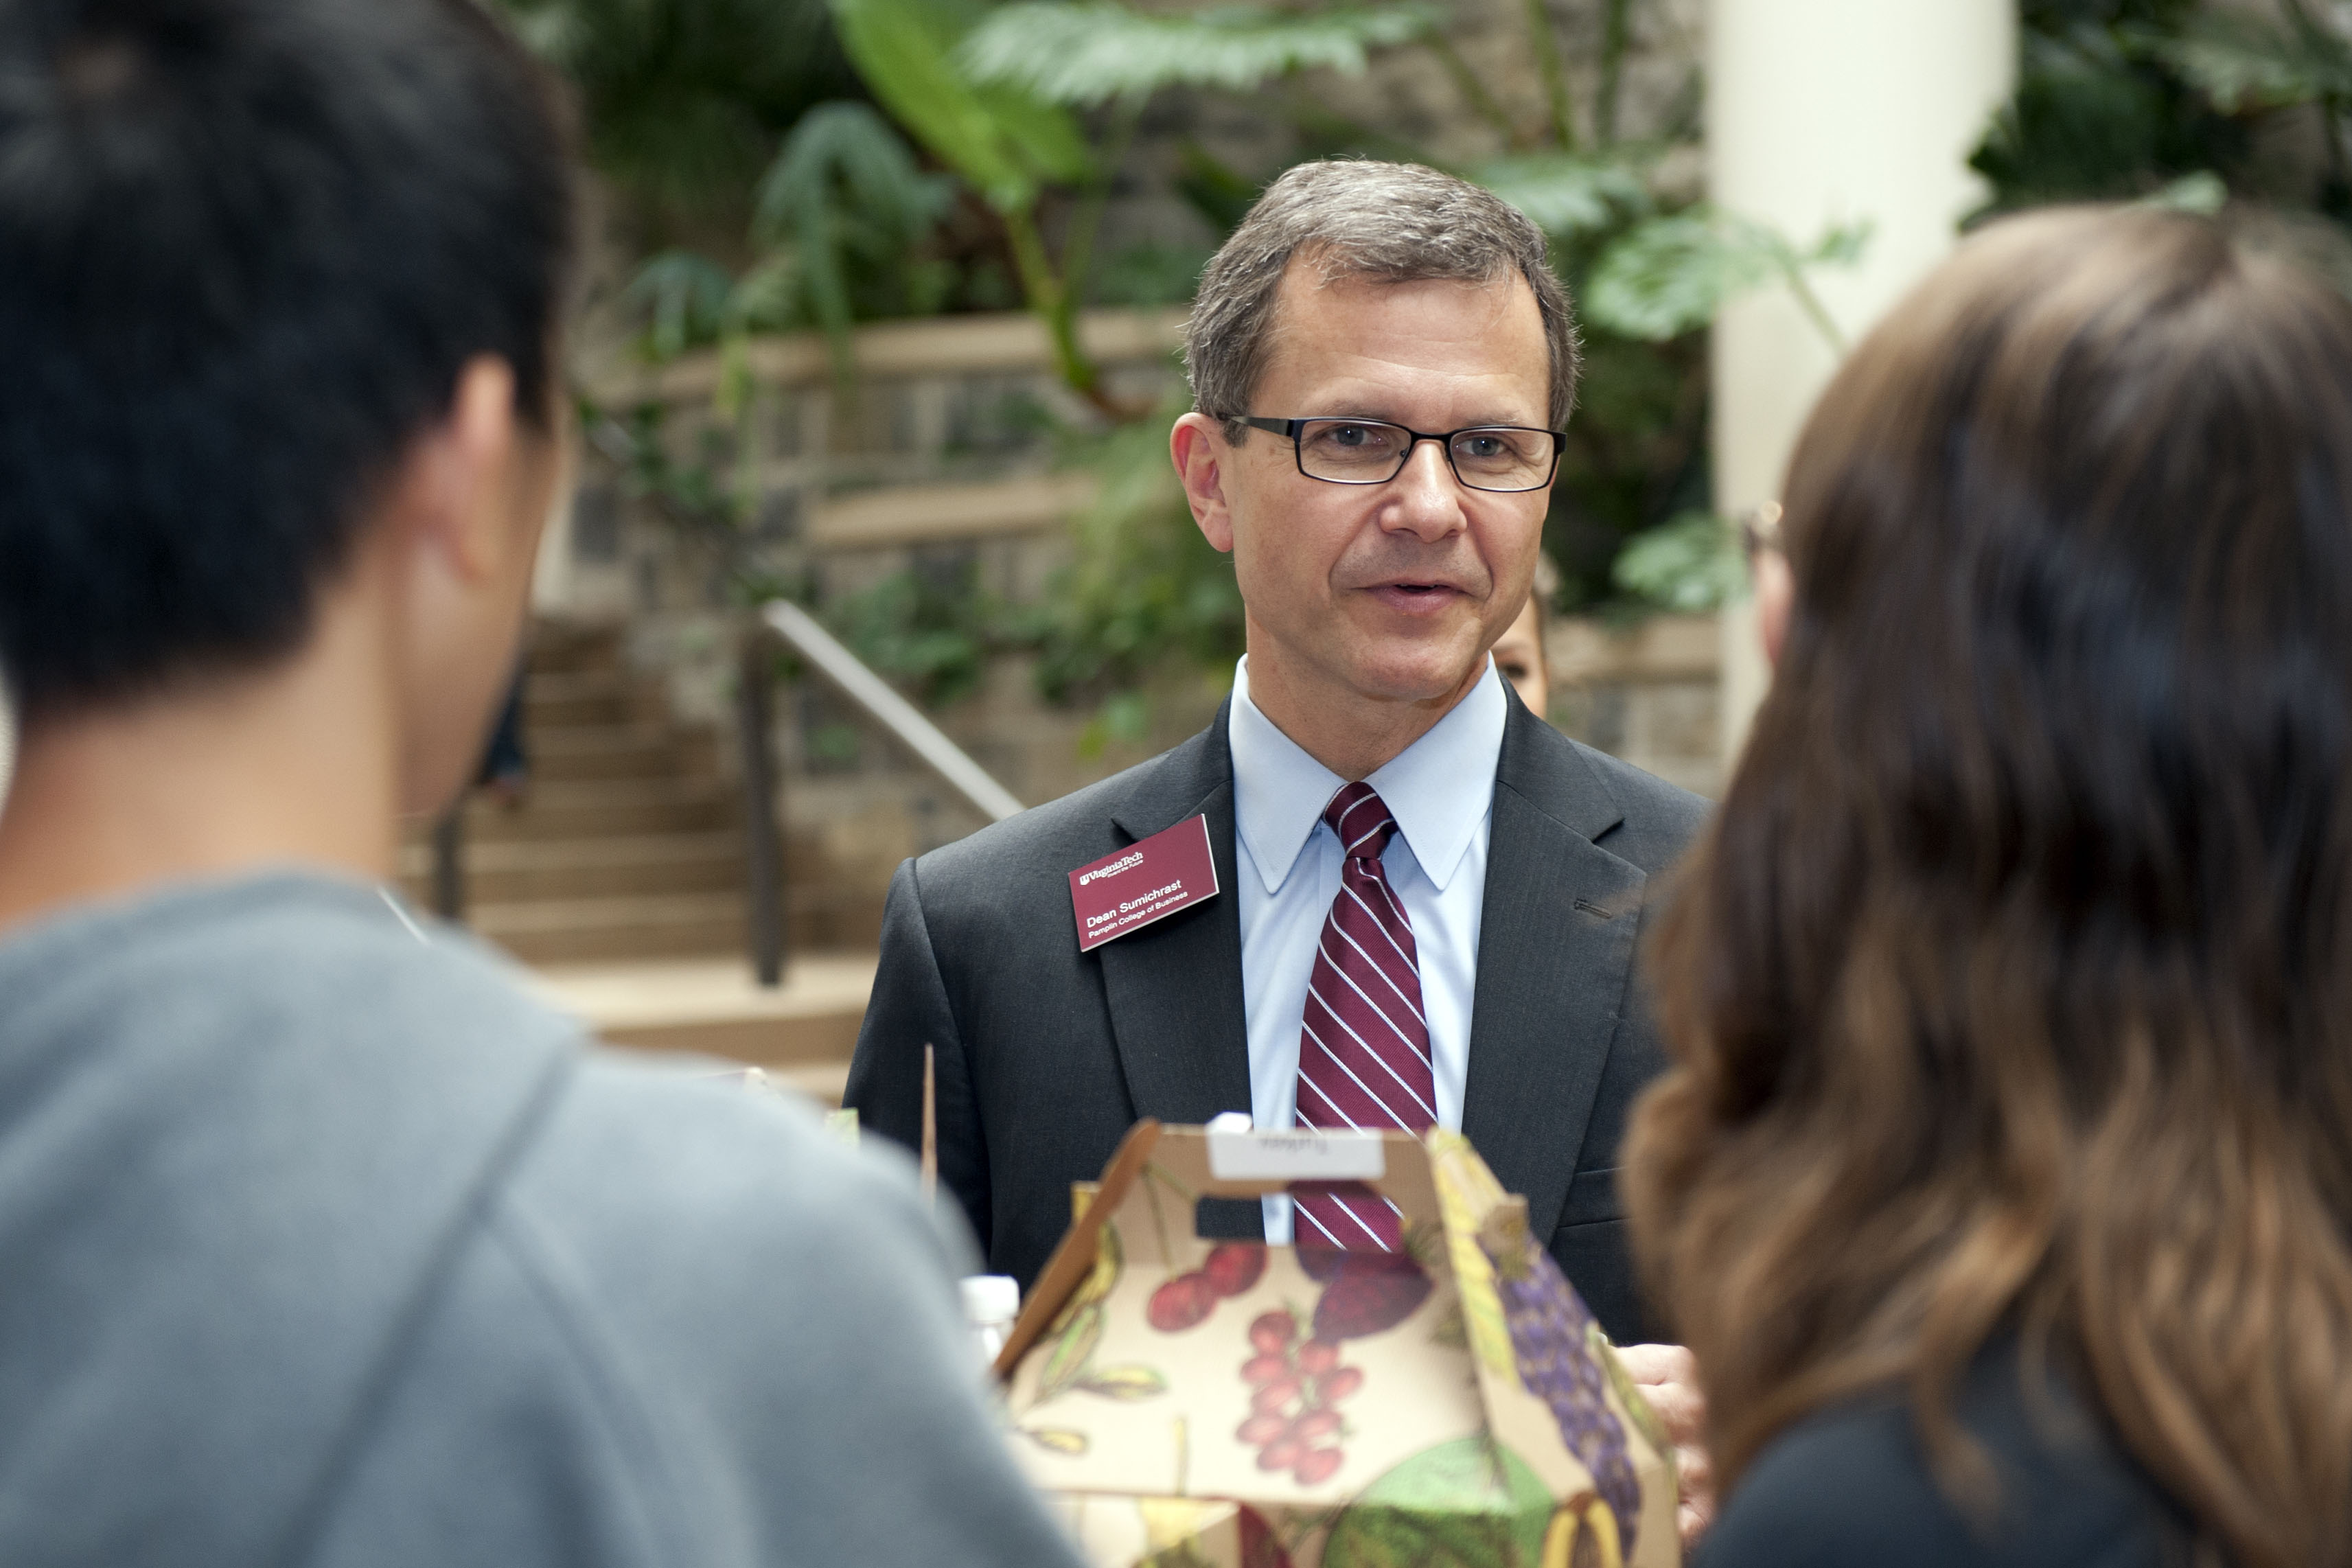 Dean Sumichrast meets students in one of his initiatives to foster a stronger Pamplin community.